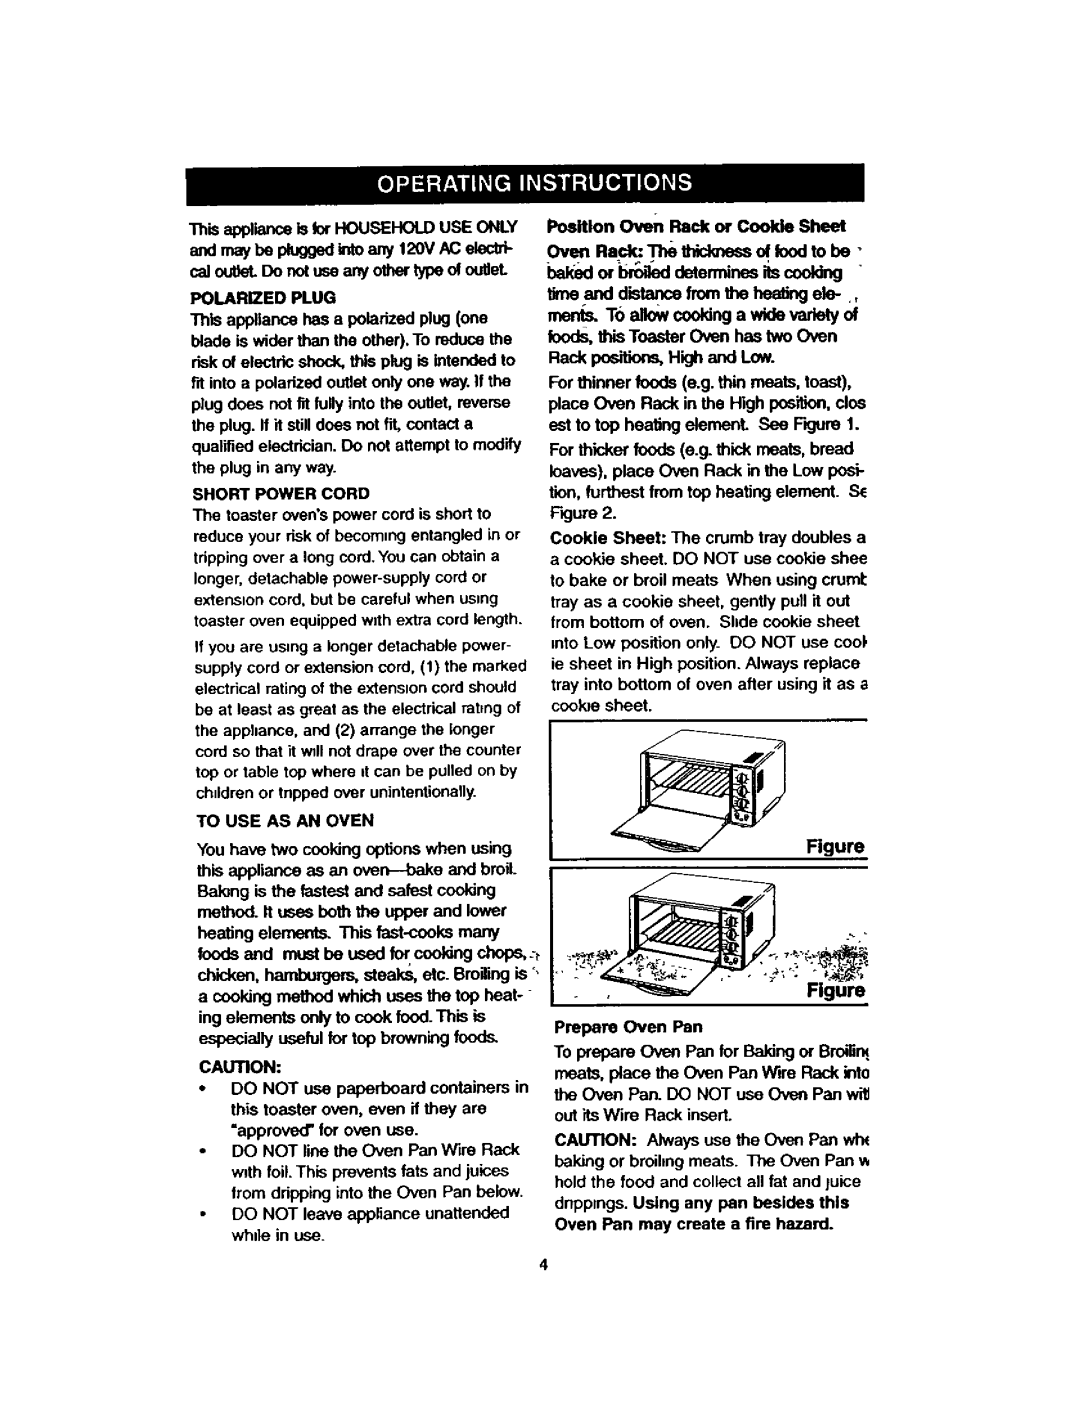 Kenmore 48449 owner manual ThisapplianceislorHOUSEHOLDONLY, mer T6a owcoddnga widevarietyof 